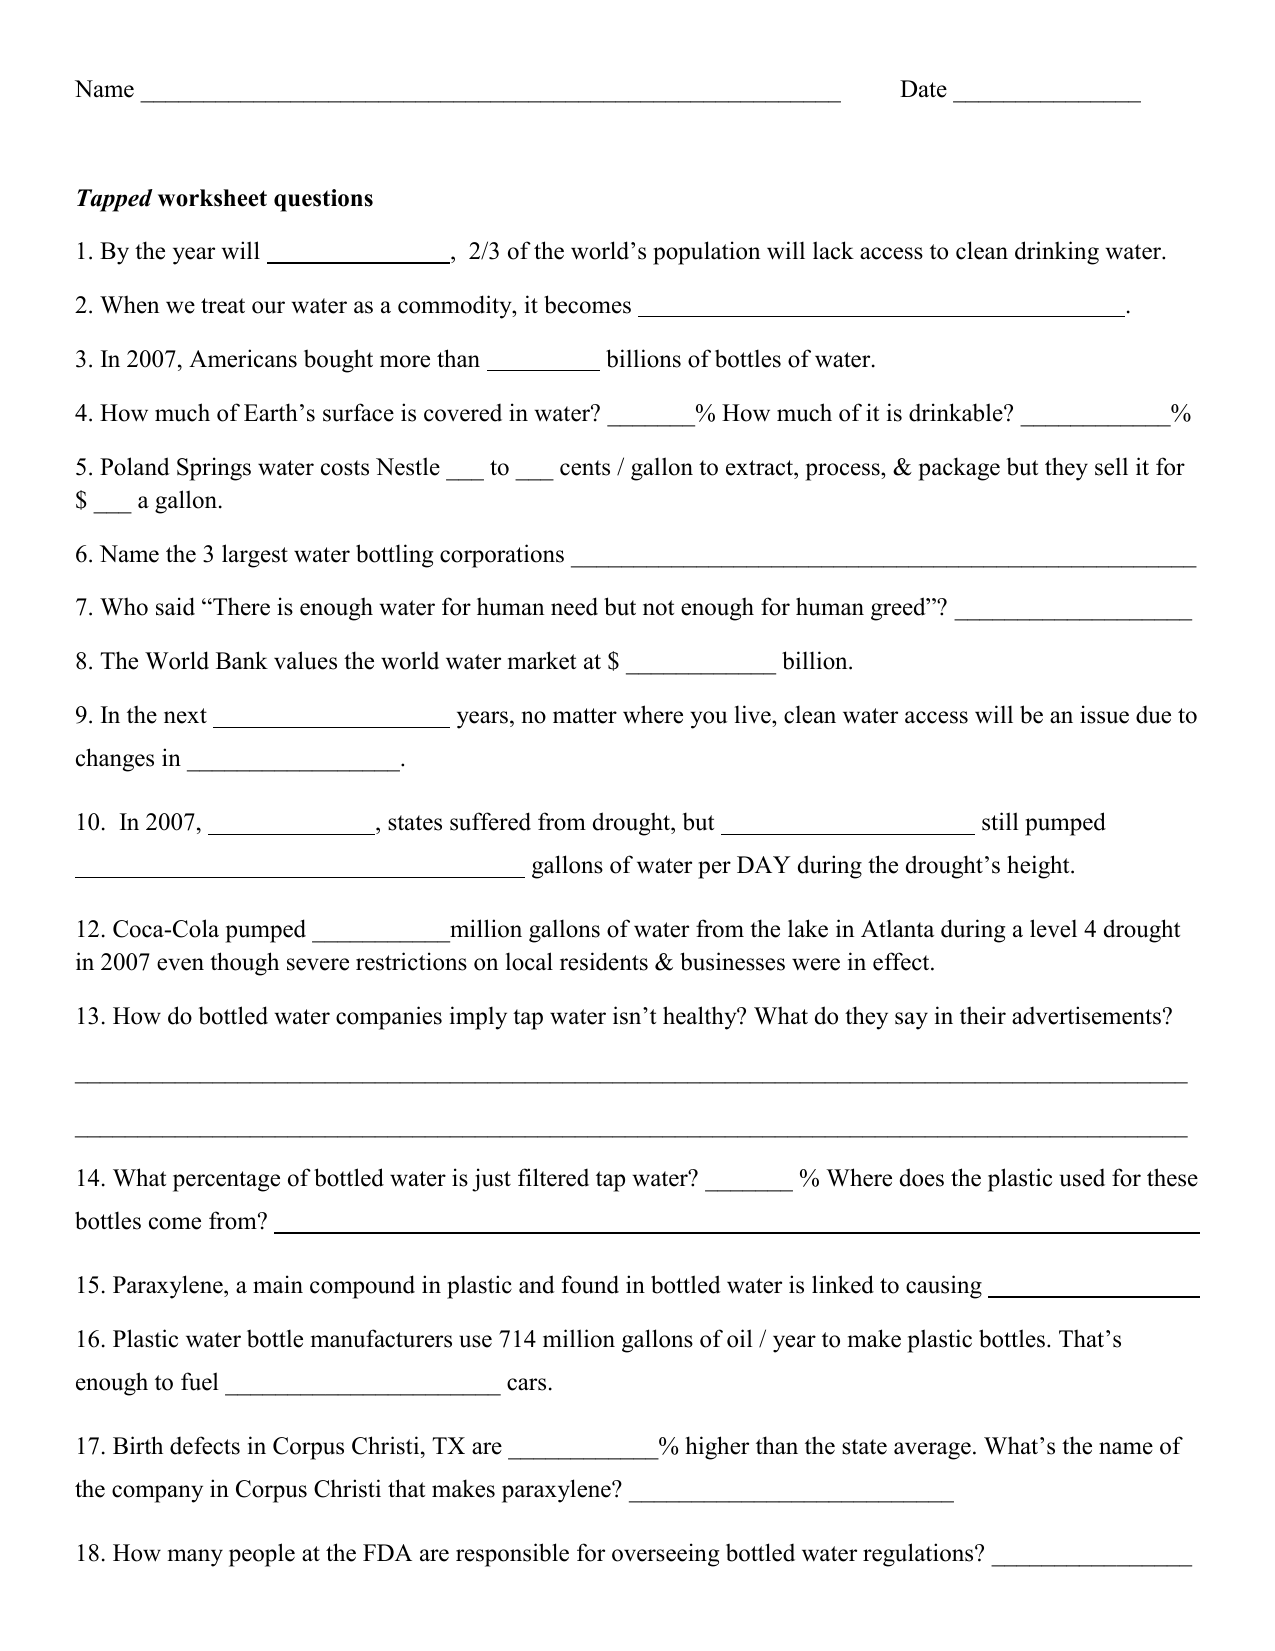 tapped-worksheet-questions-junanlus-traciones